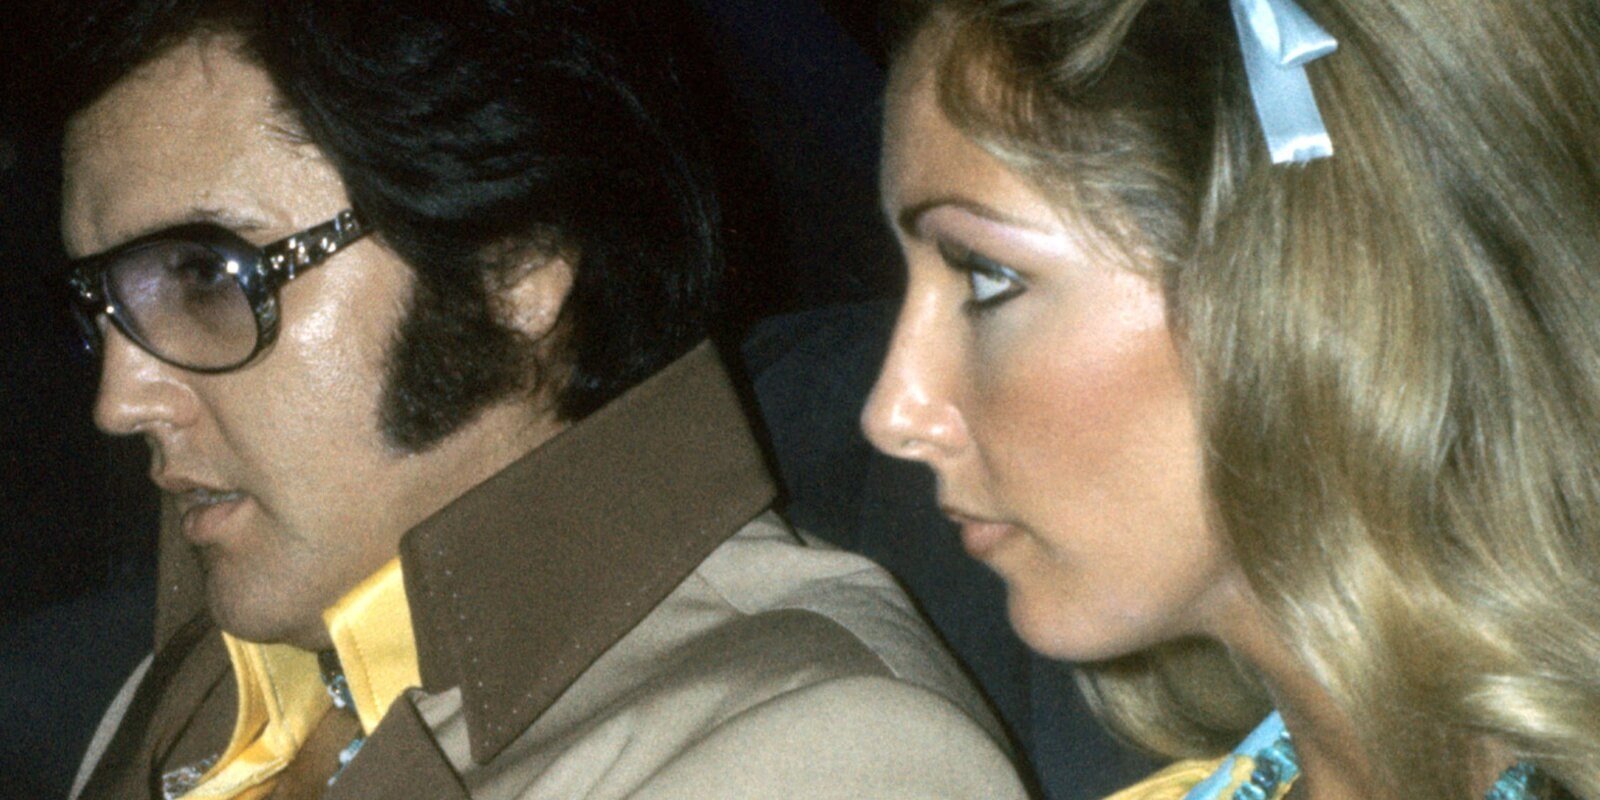 Elvis Presley and Linda Thompson photographed in 1976.